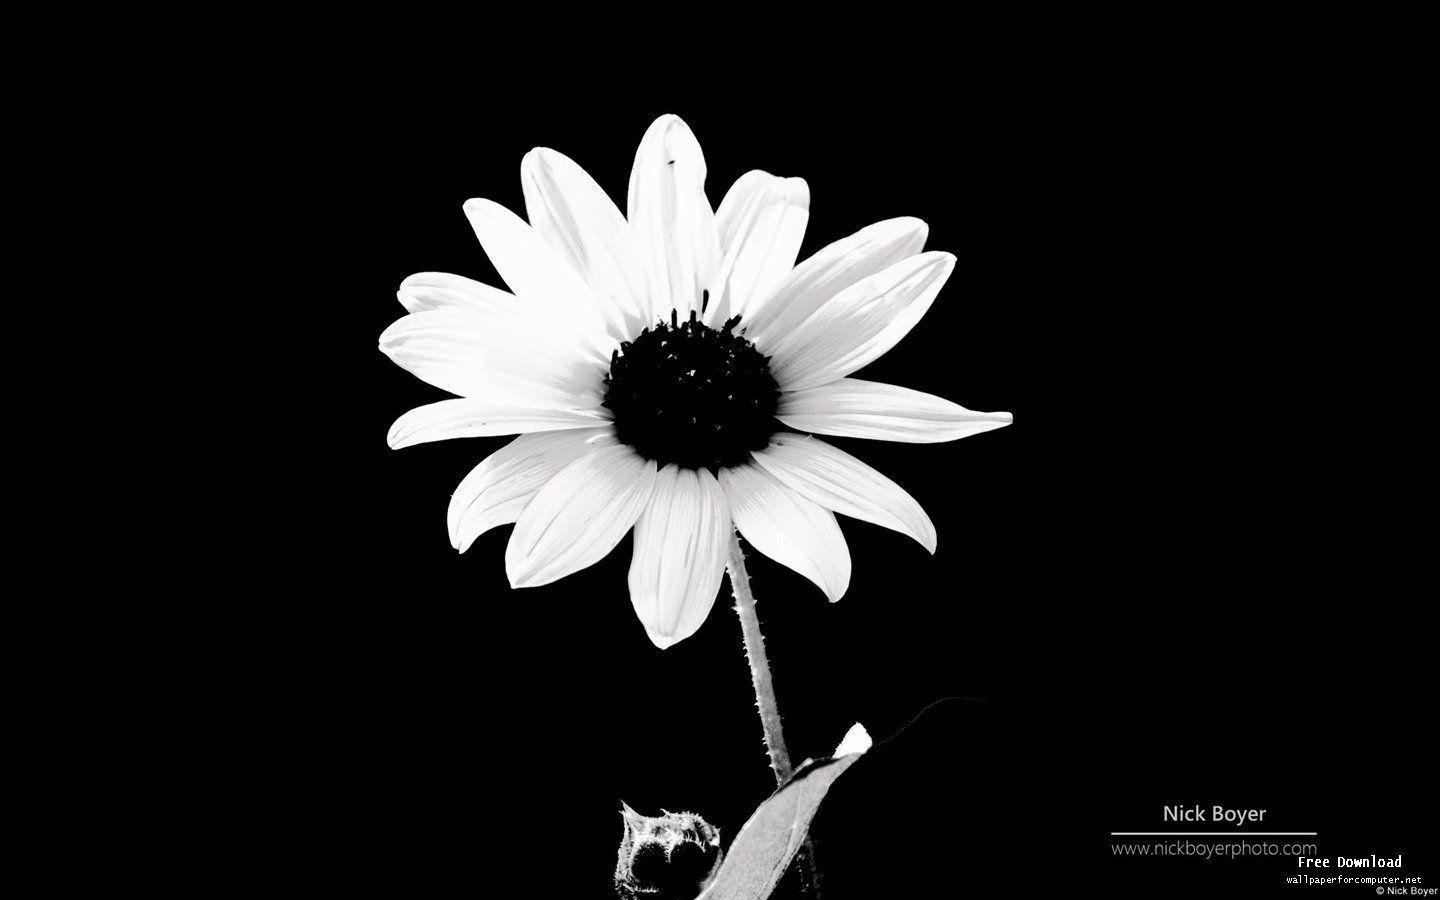 Black and White Flowers wallpaper | 1440x900 | #51486